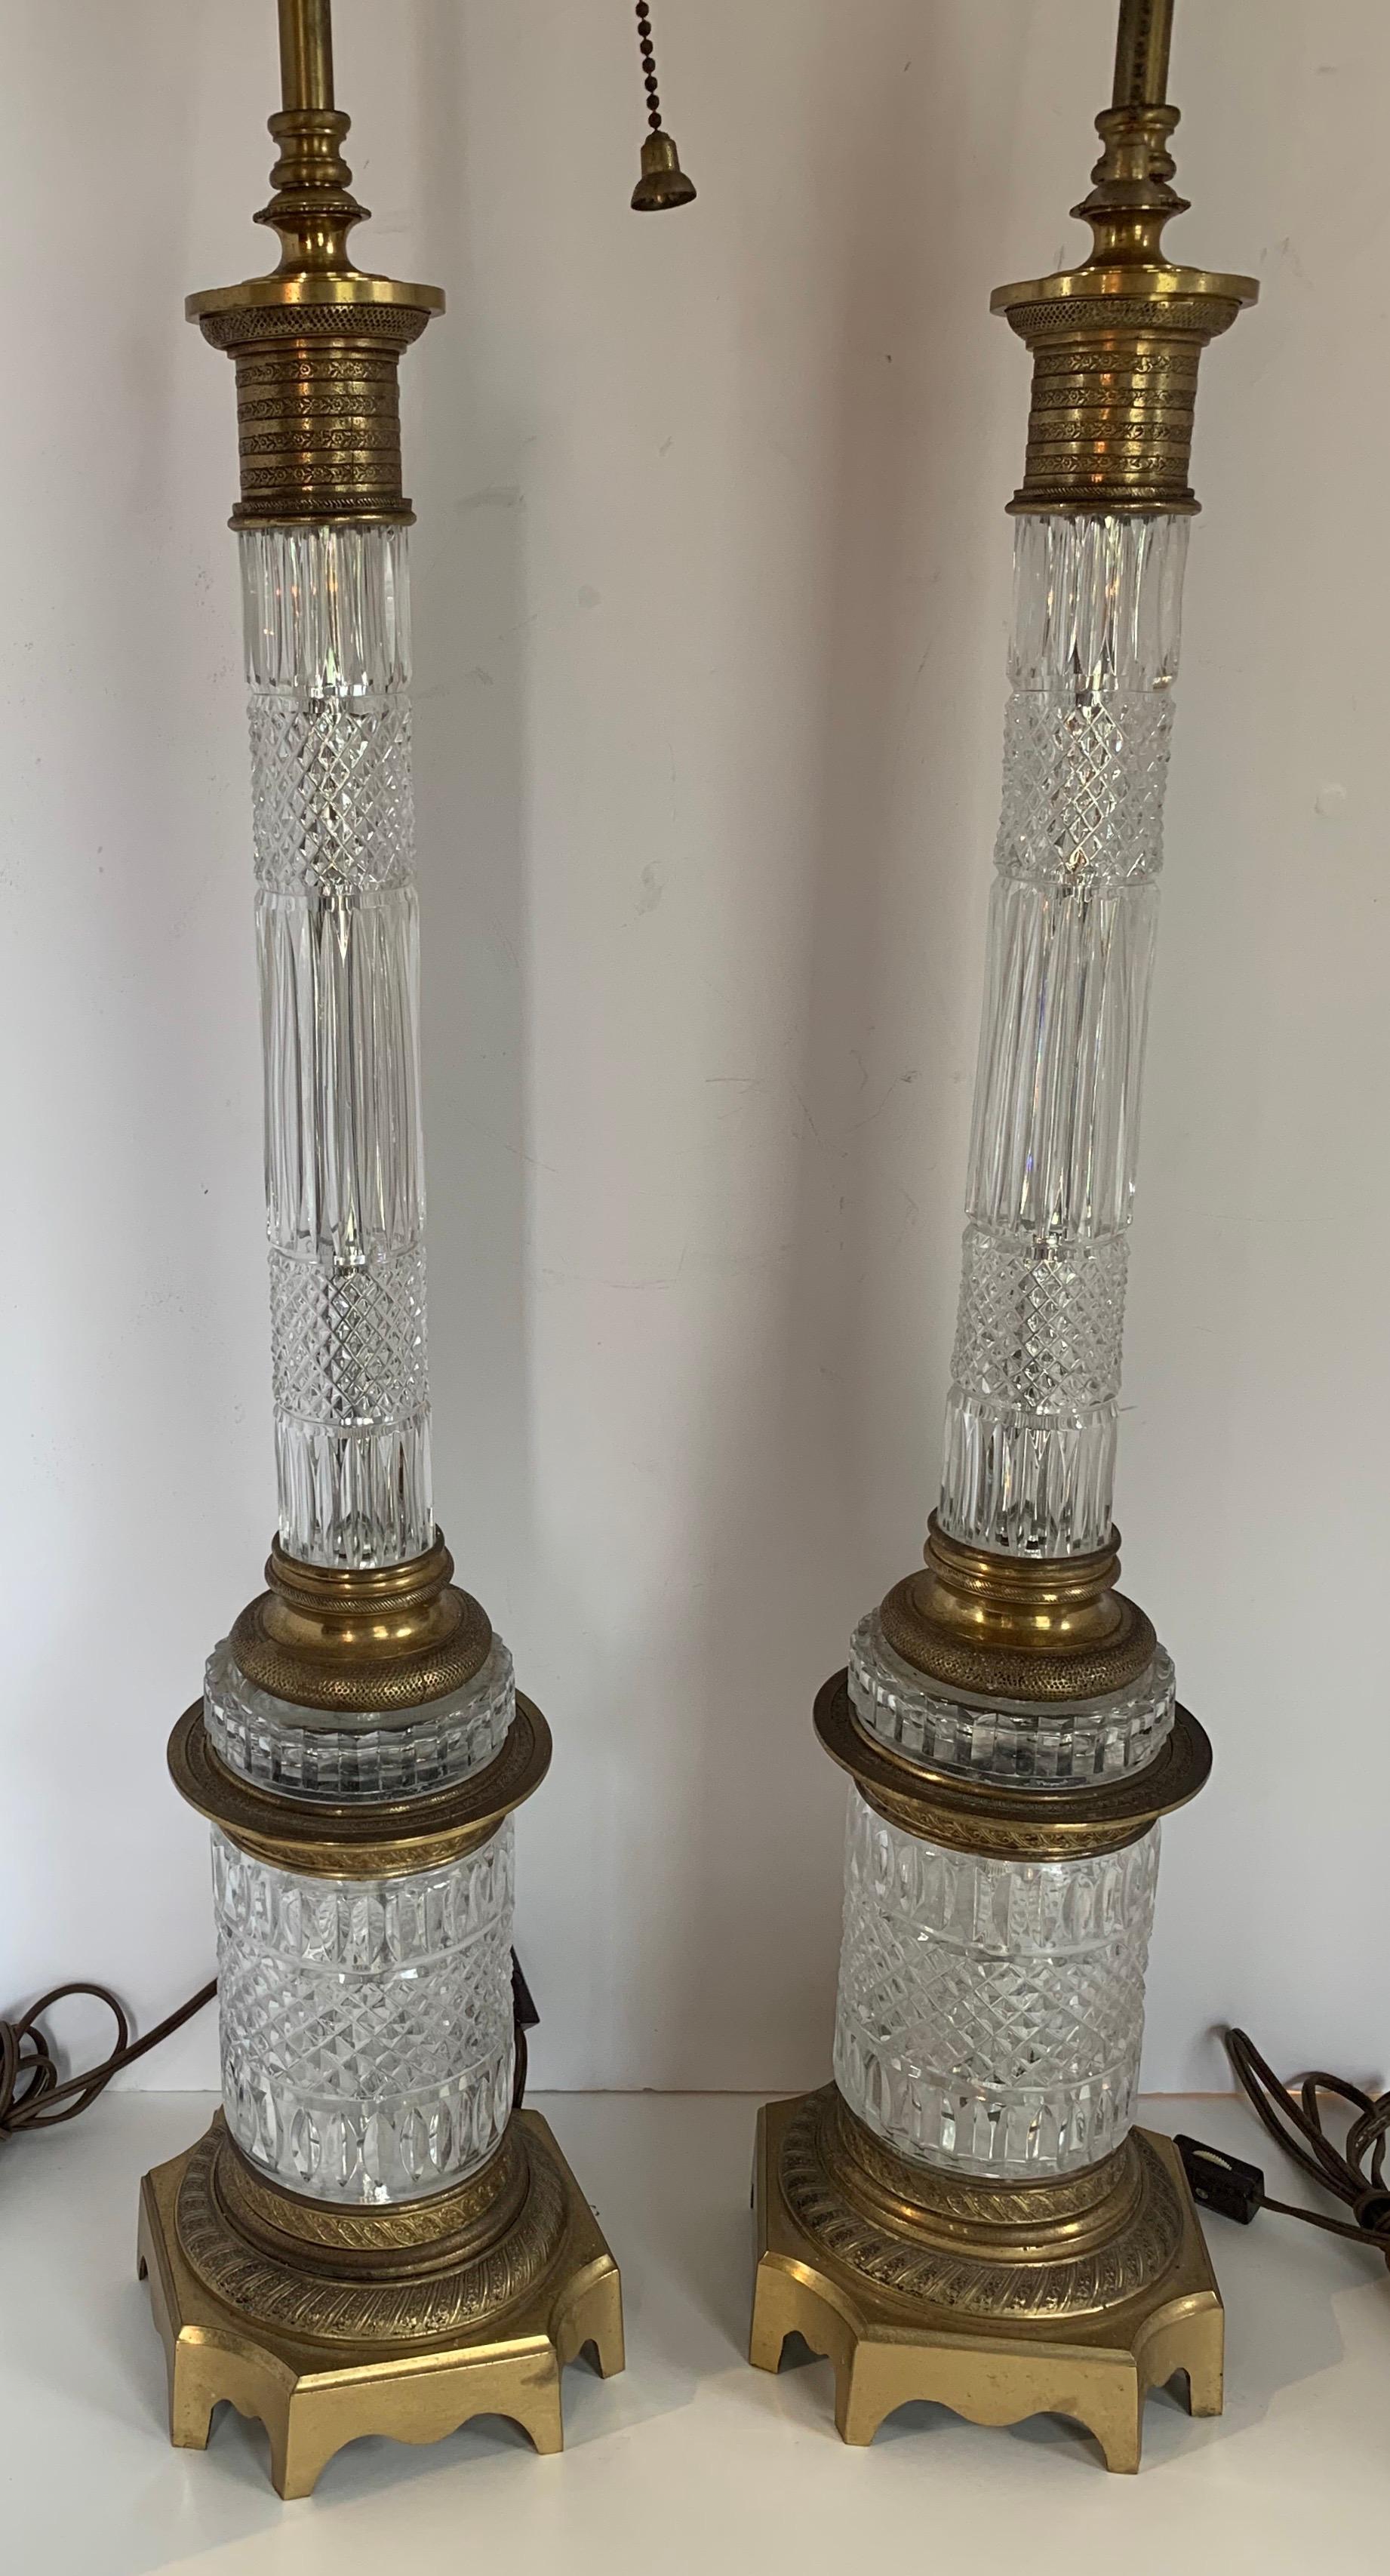 An elegant French pair of gilt doré bronze and cut crystal ormolu column neoclassical lamps with @ Edison Lights Each, In the manner of Baccarat